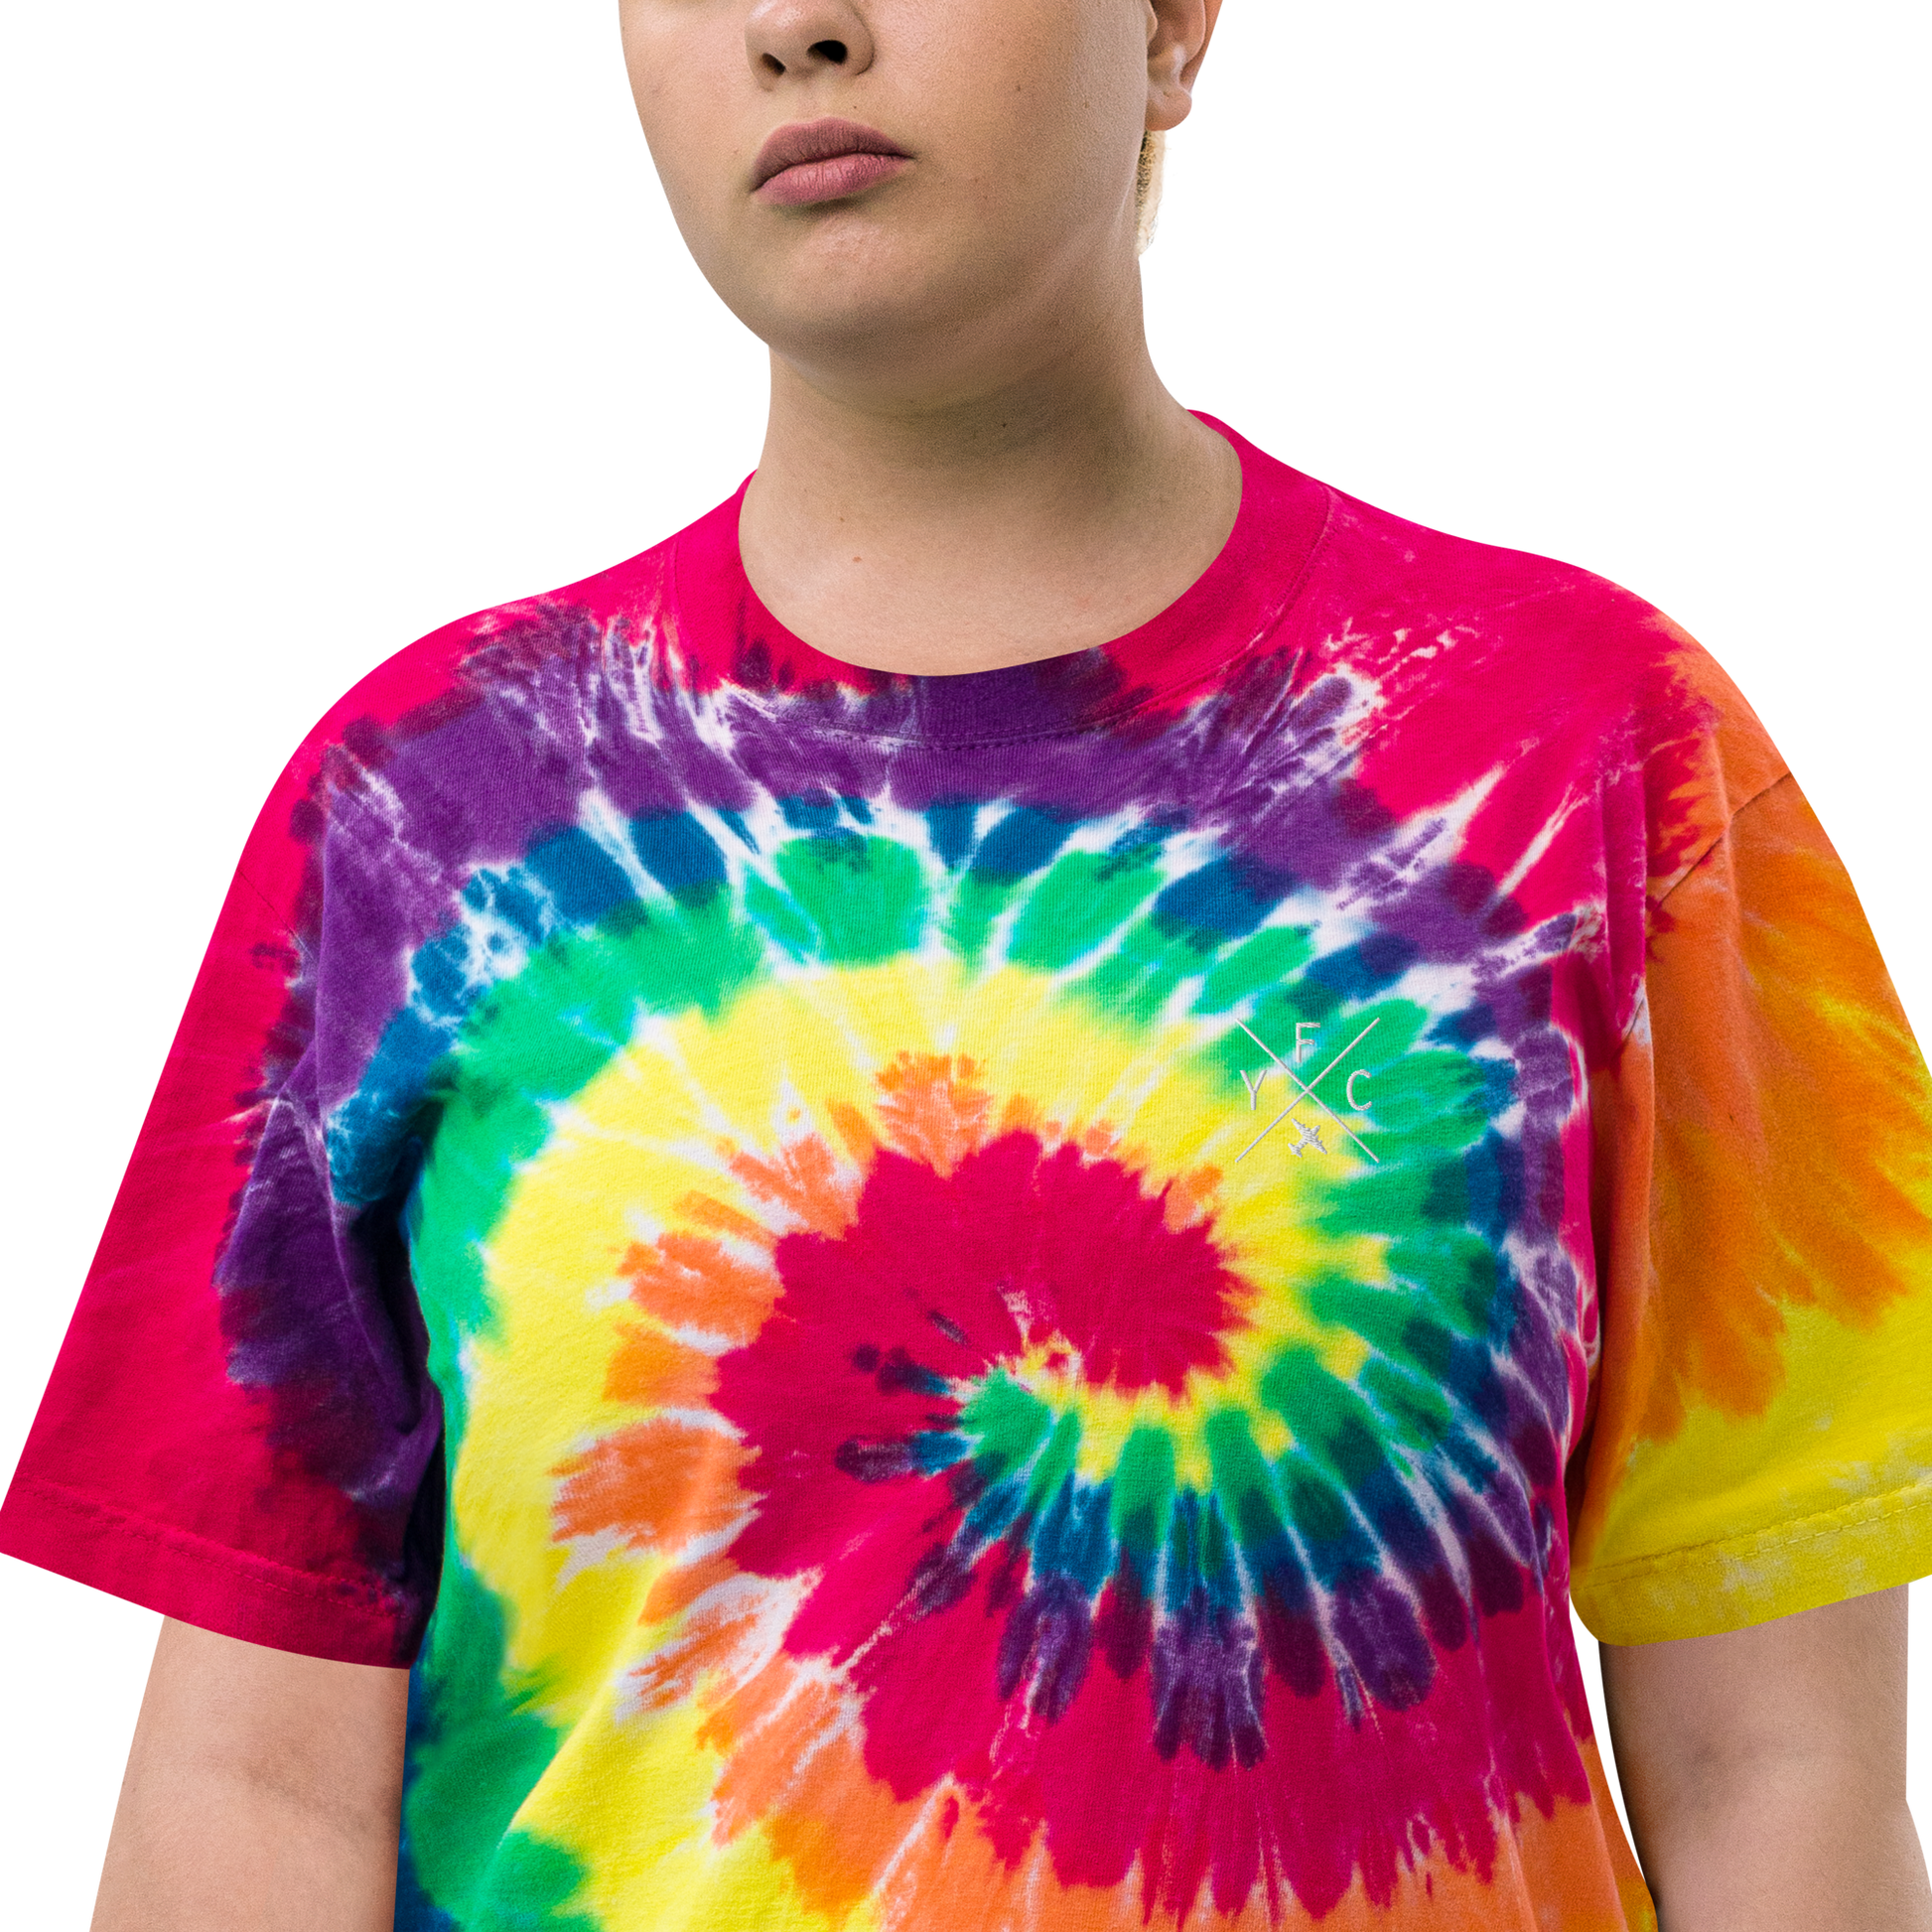 YHM Designs - YFC Fredericton Oversized Tie-Dye T-Shirt - Crossed-X Design with Airport Code and Vintage Propliner - White Embroidery - Image 15